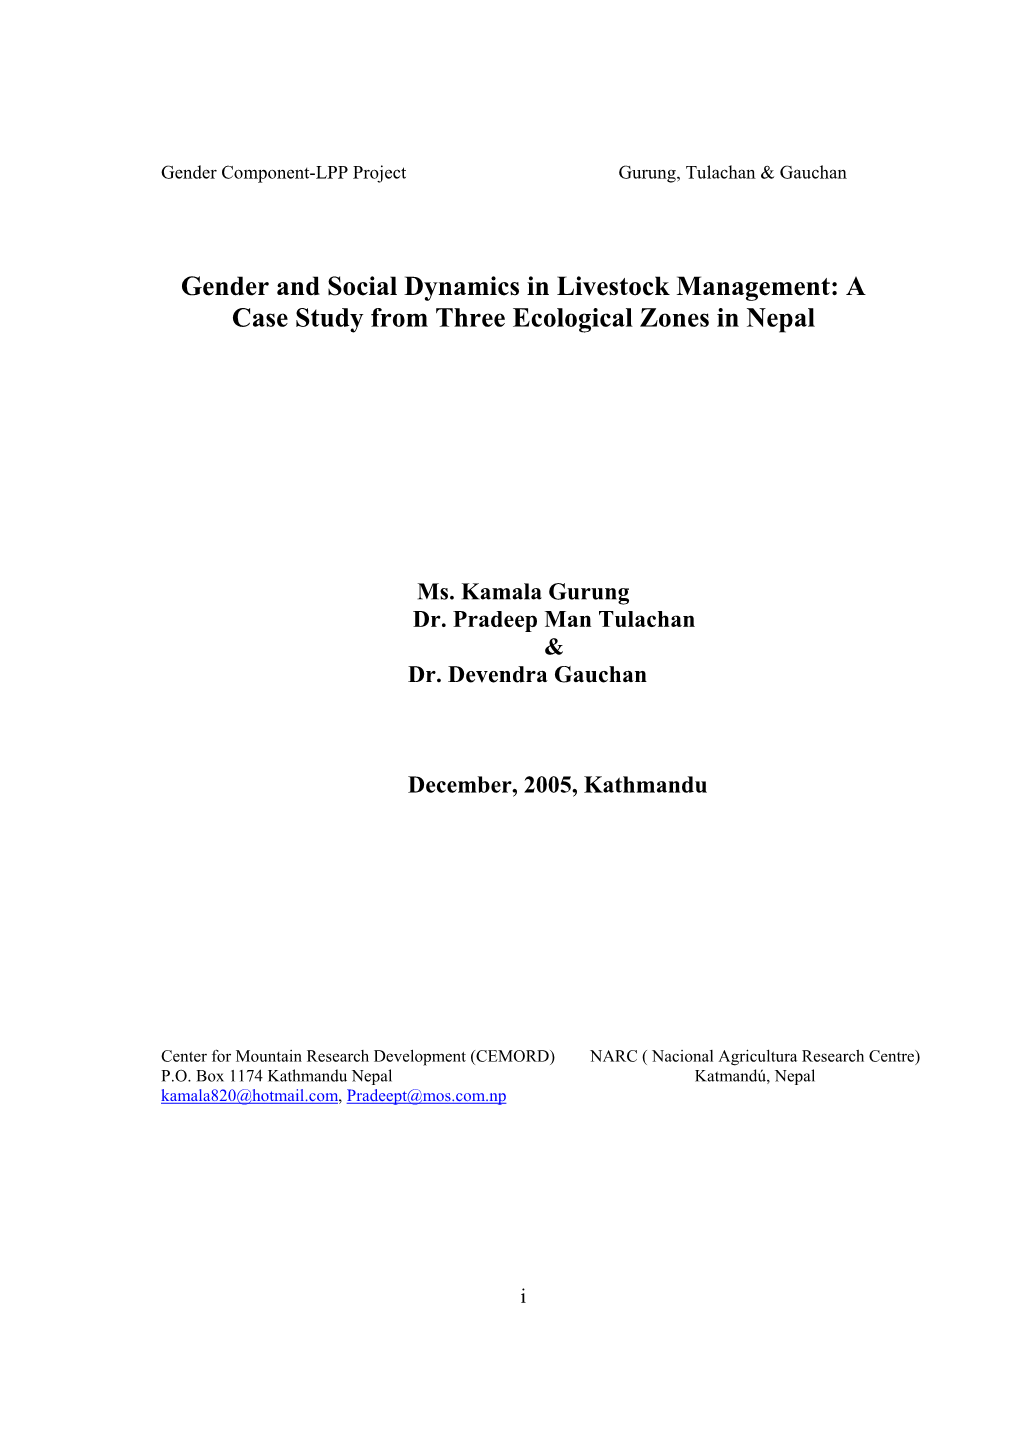 Gender and Social Dynamics in Livestock Management: a Case Study from Three Ecological Zones in Nepal